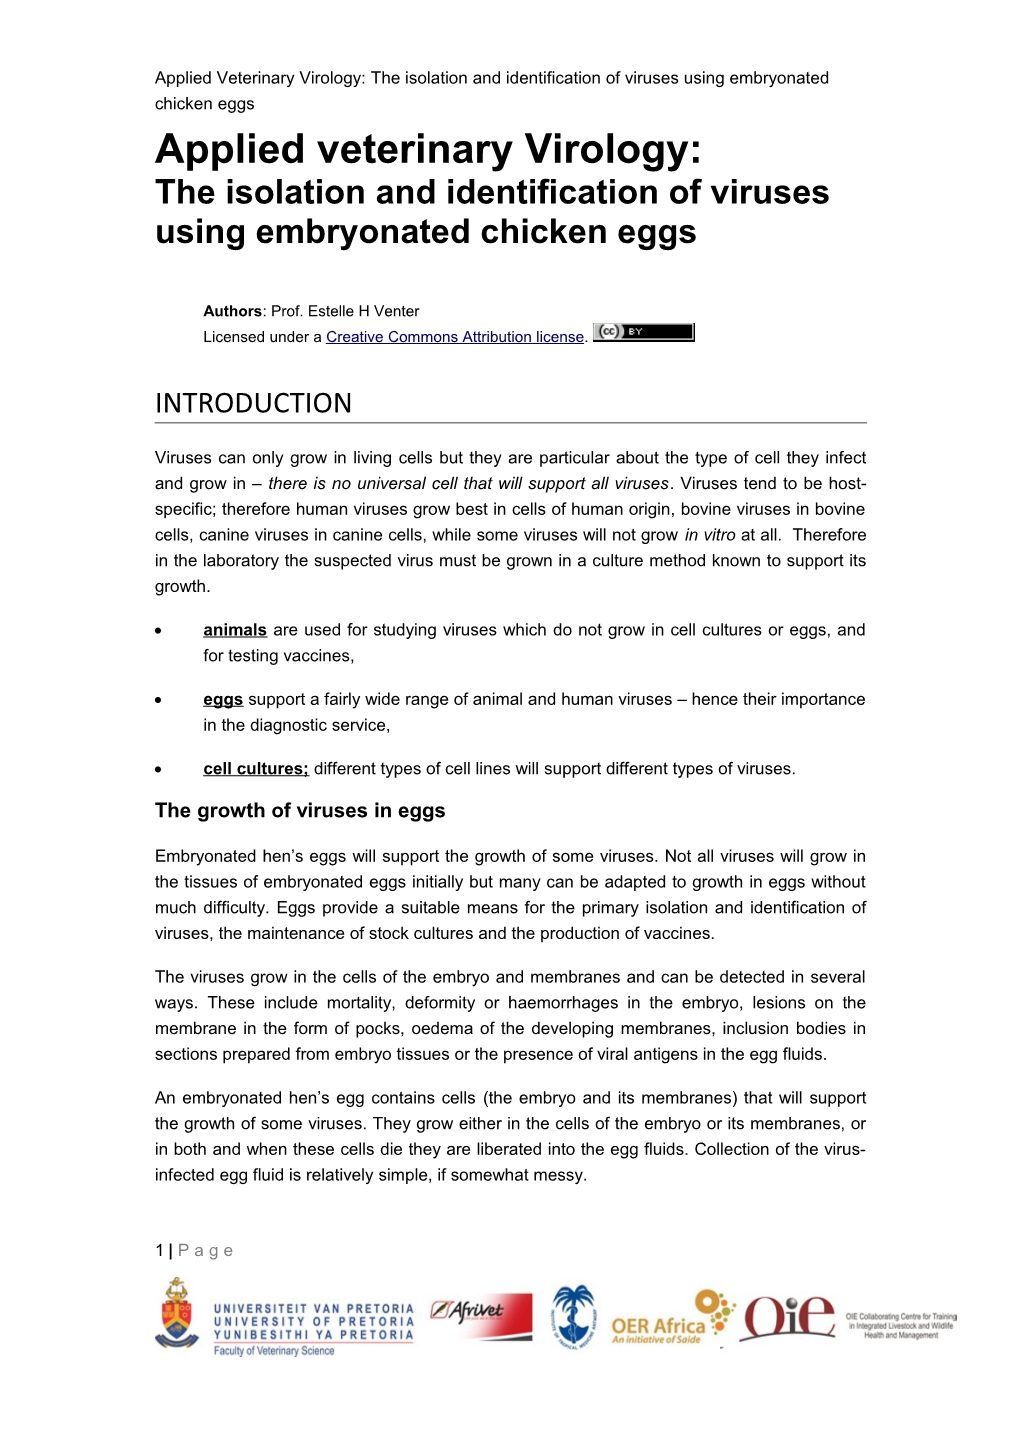 The Isolation and Identification of Viruses Using Embryonated Chicken Eggs